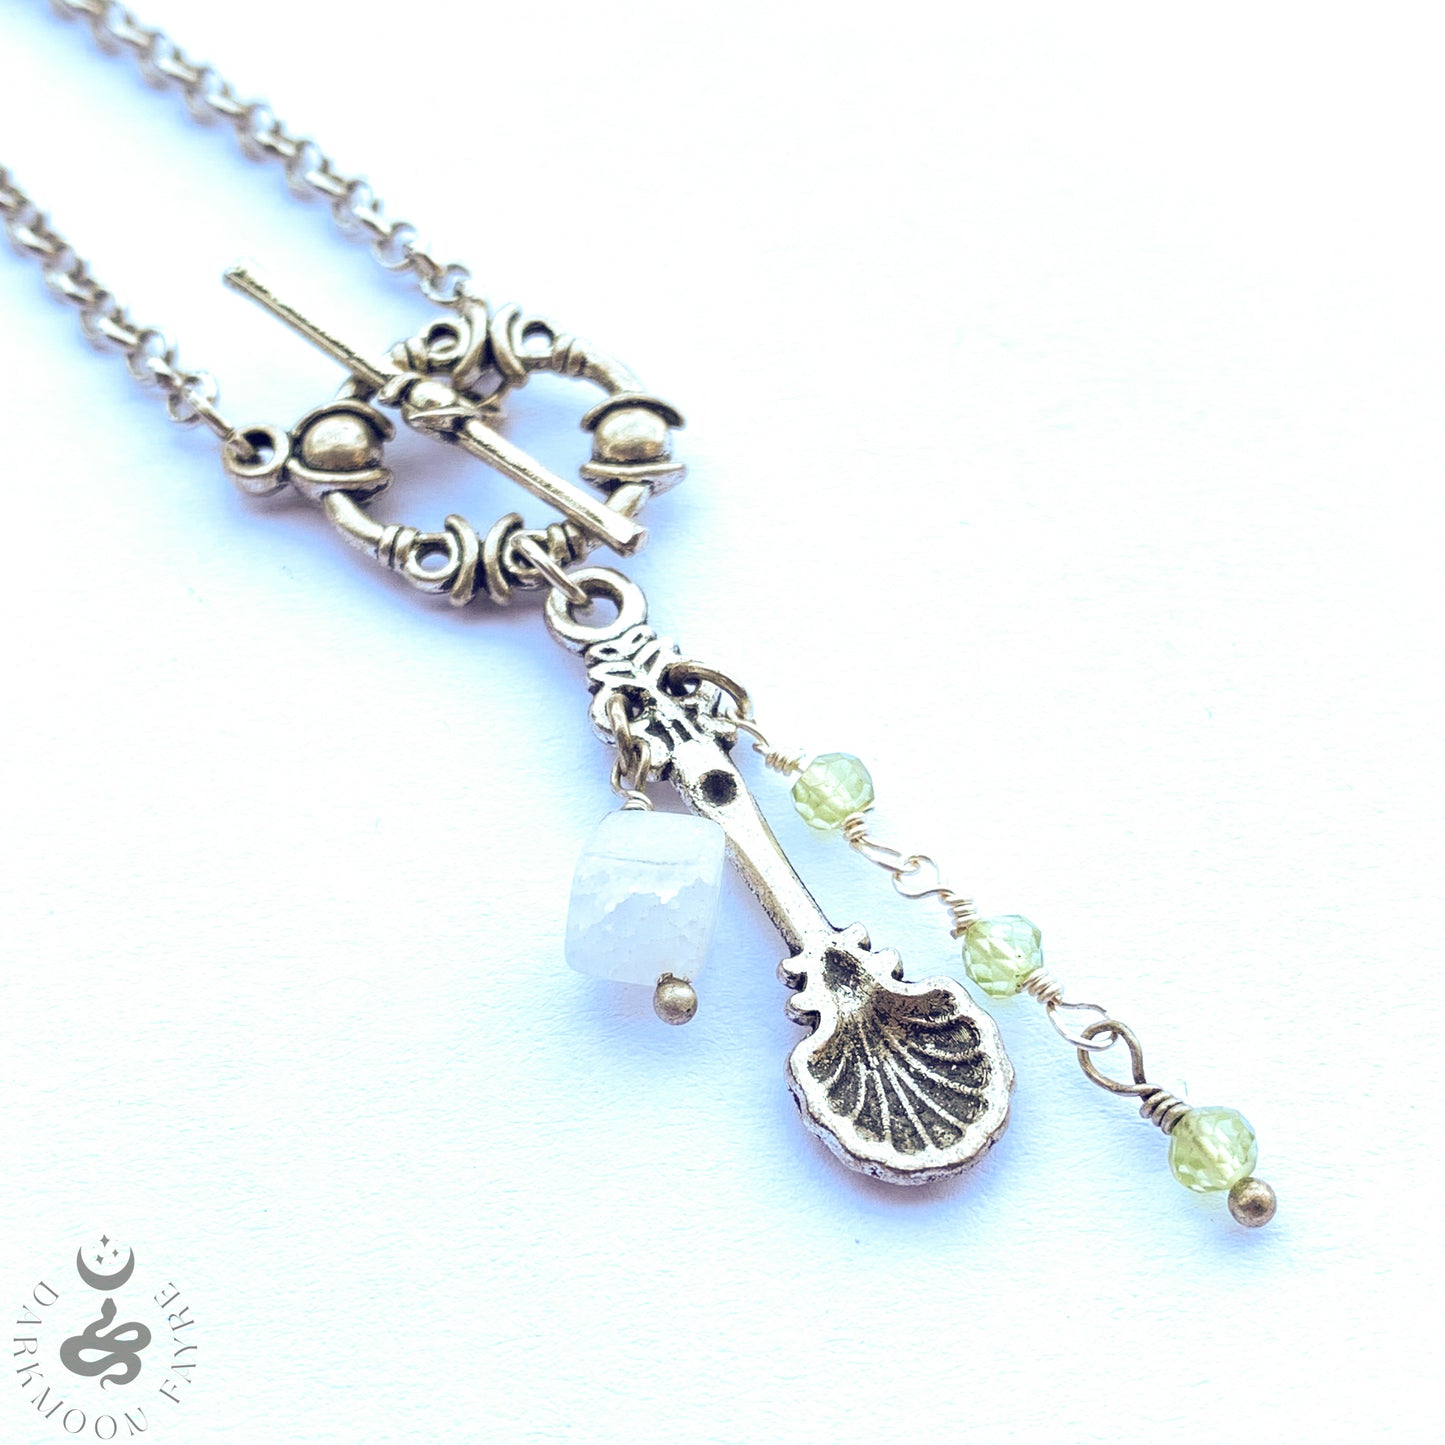 Absinthe Ritual Green Fairy Necklace With Peridot And Quartz "sugar cubes" In Silver - Darkmoon Fayre